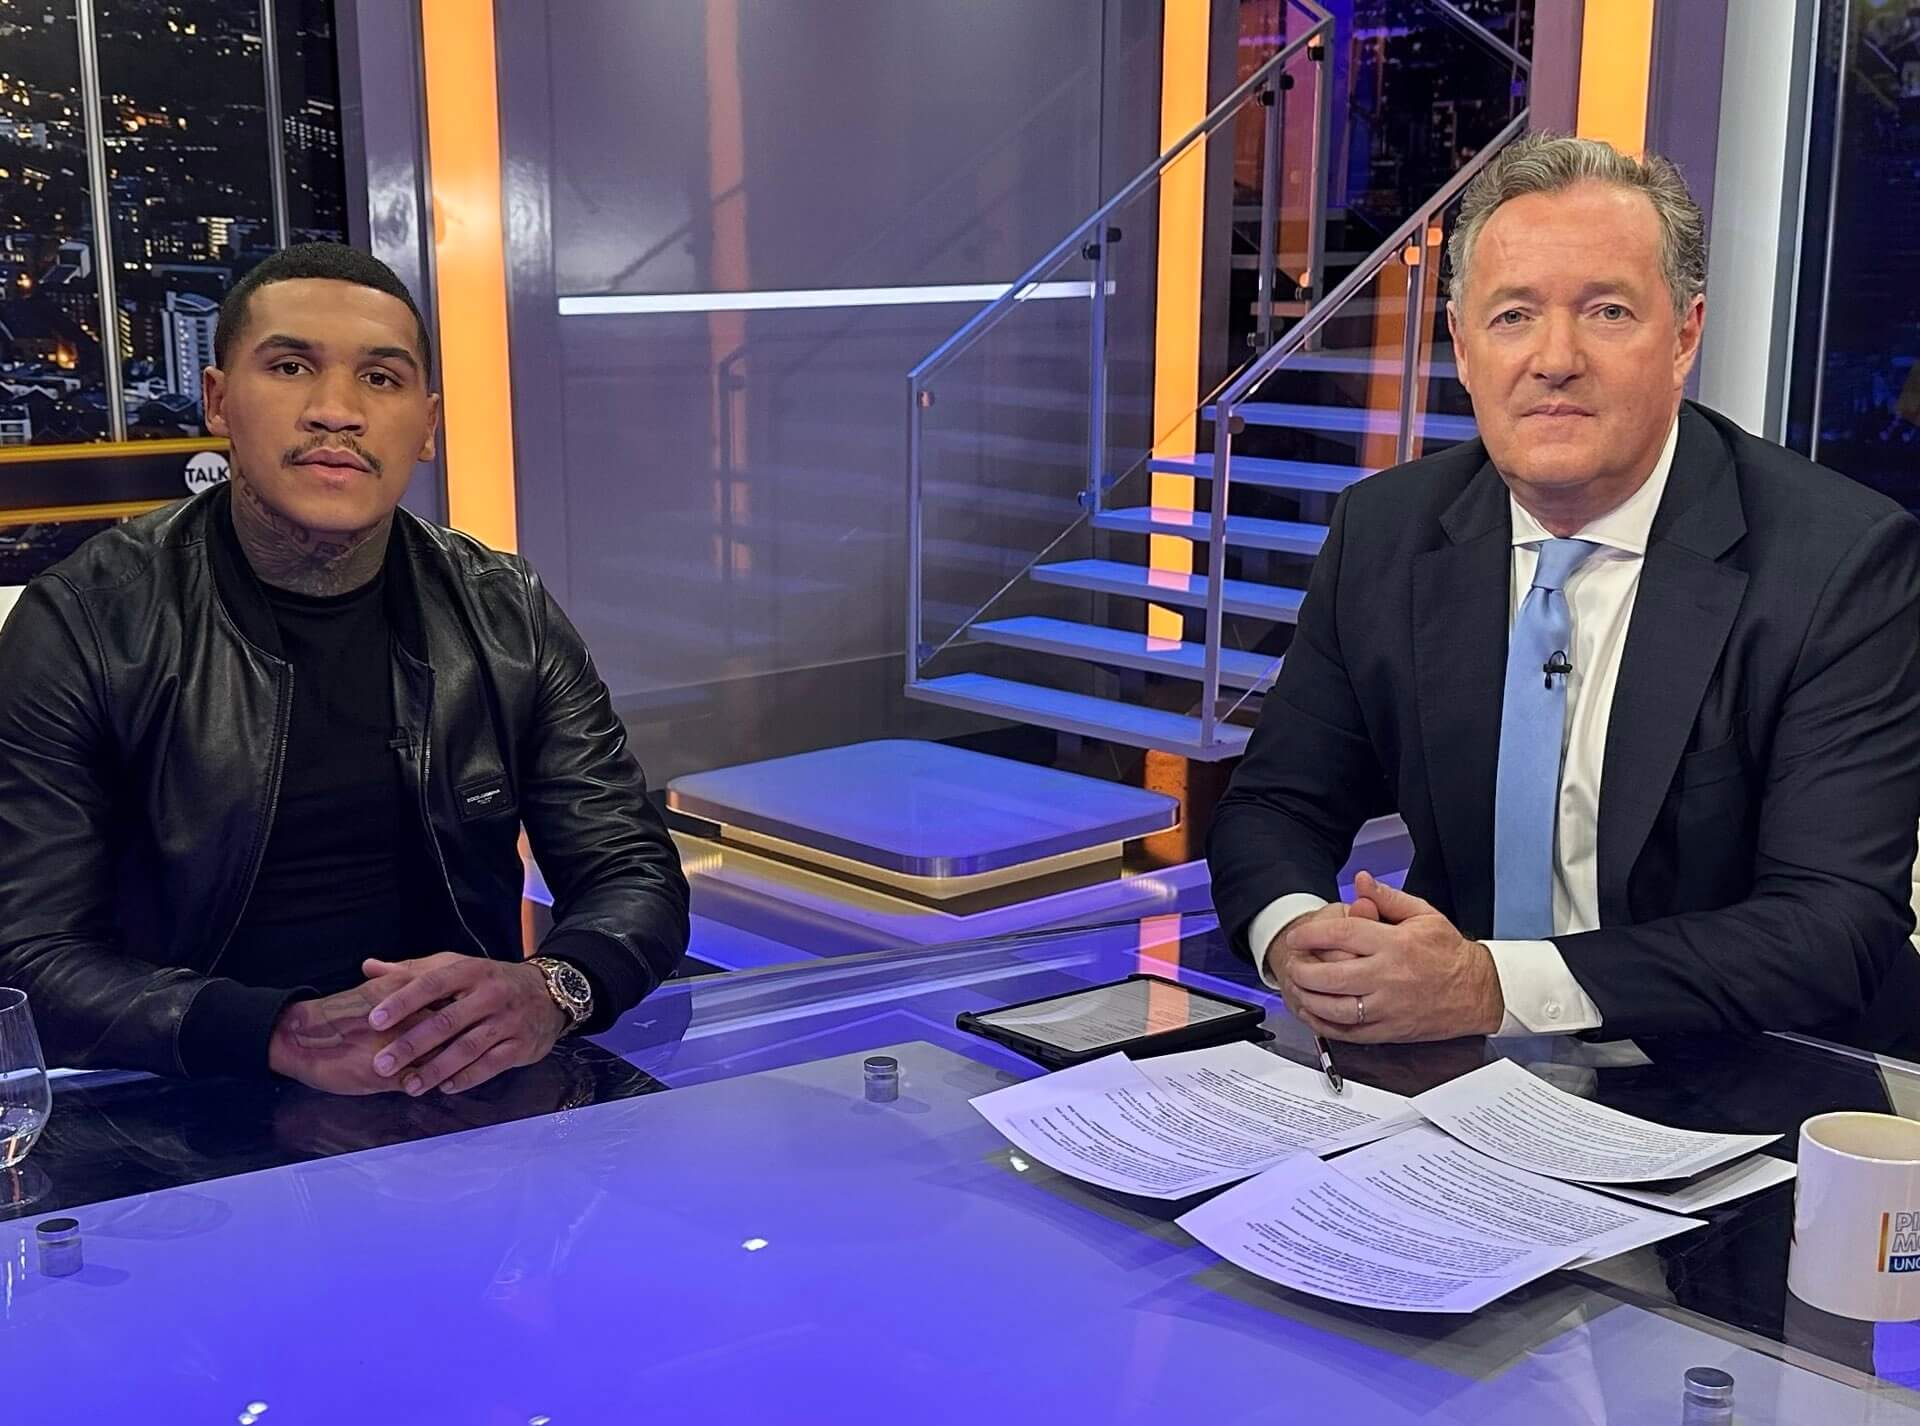 Conor Benn insists upon innocence in Piers Morgan interview